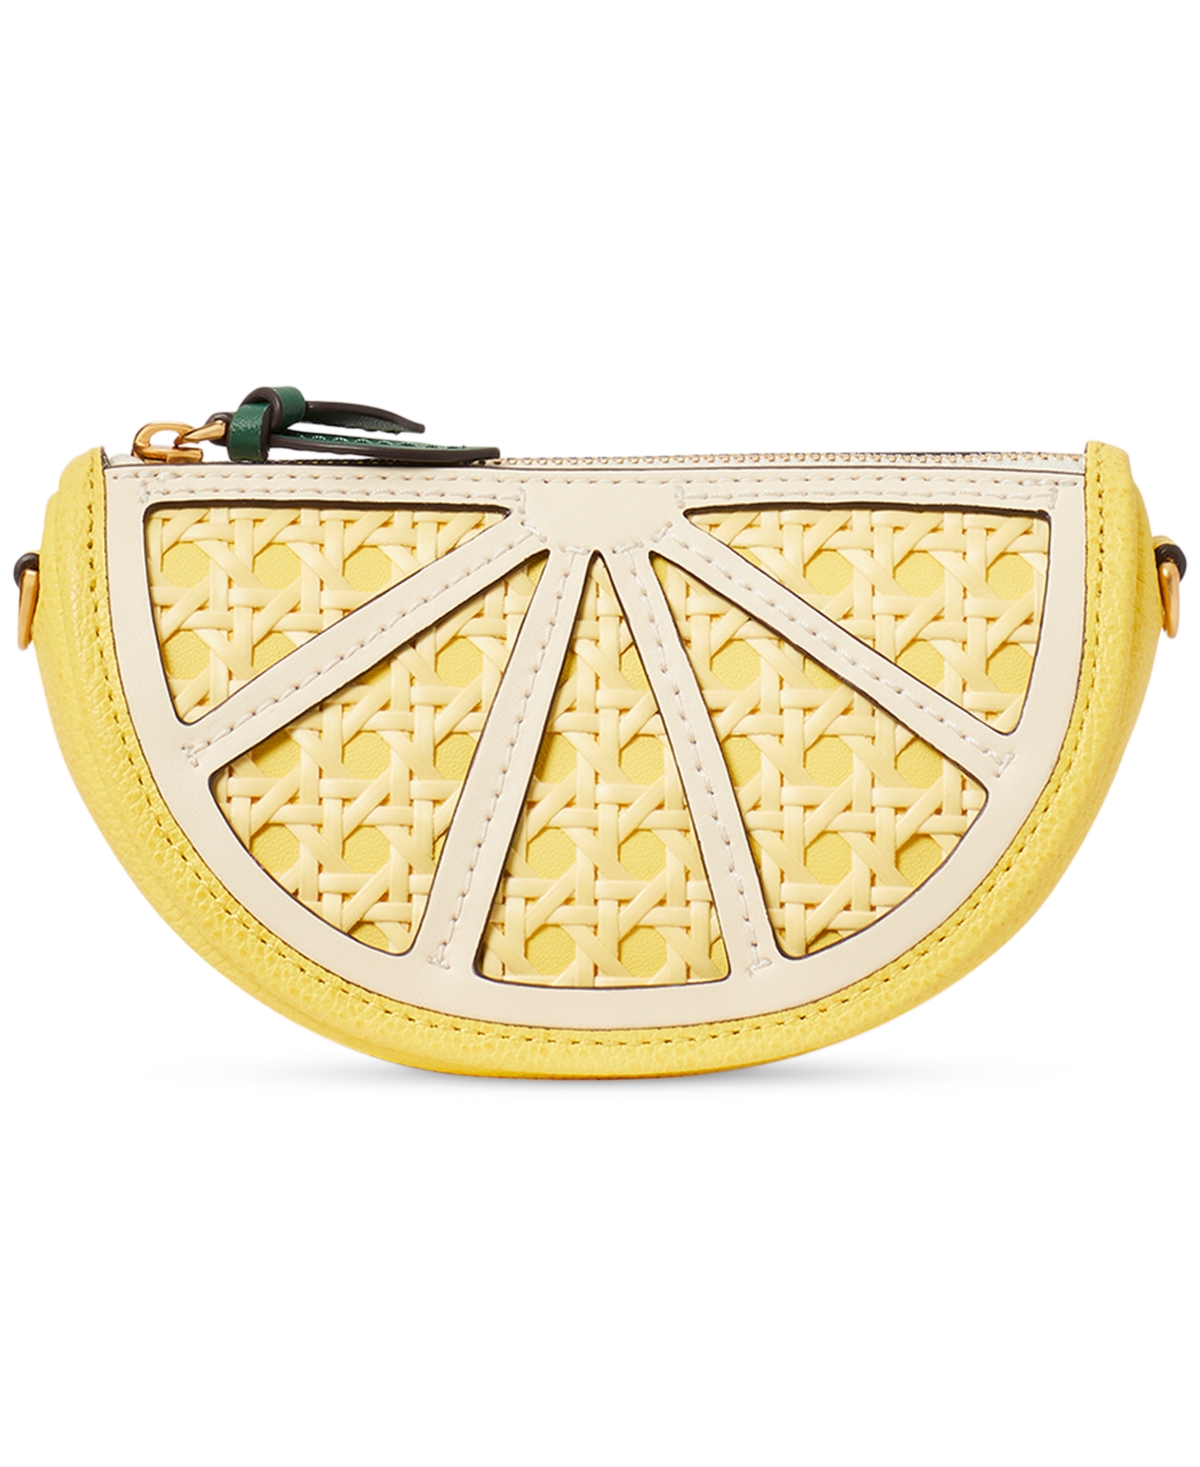 Kate Spade Lemon Drop Embellished Leather Mini Purse With Chain In Dandelion Yellow